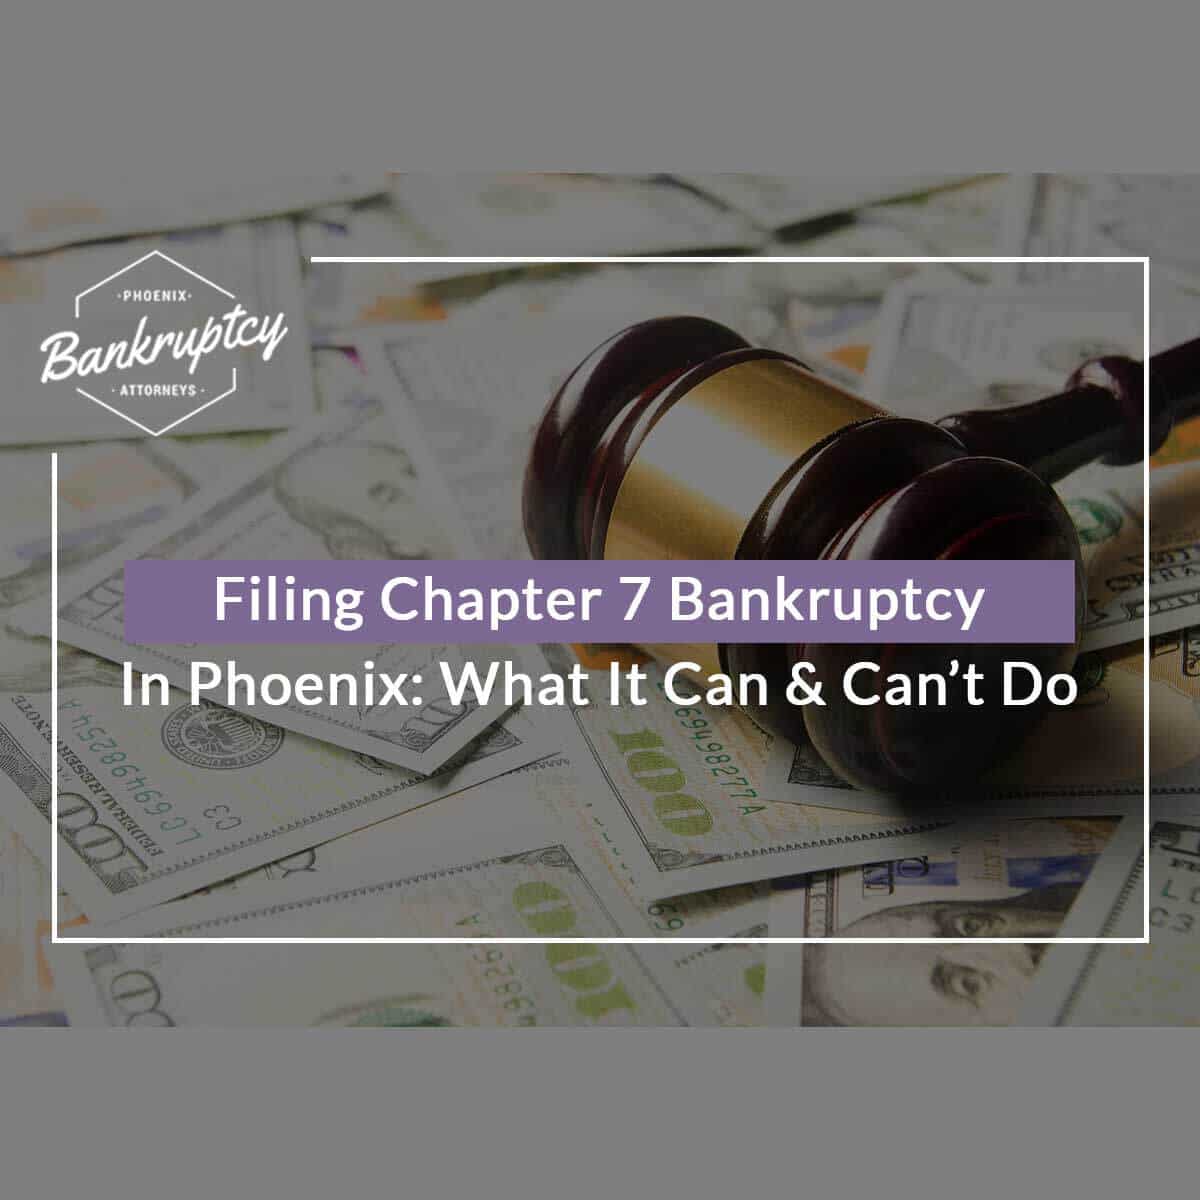 Filing Chapter 7 Bankruptcy In Phoenix: What It Can & Can’t Do